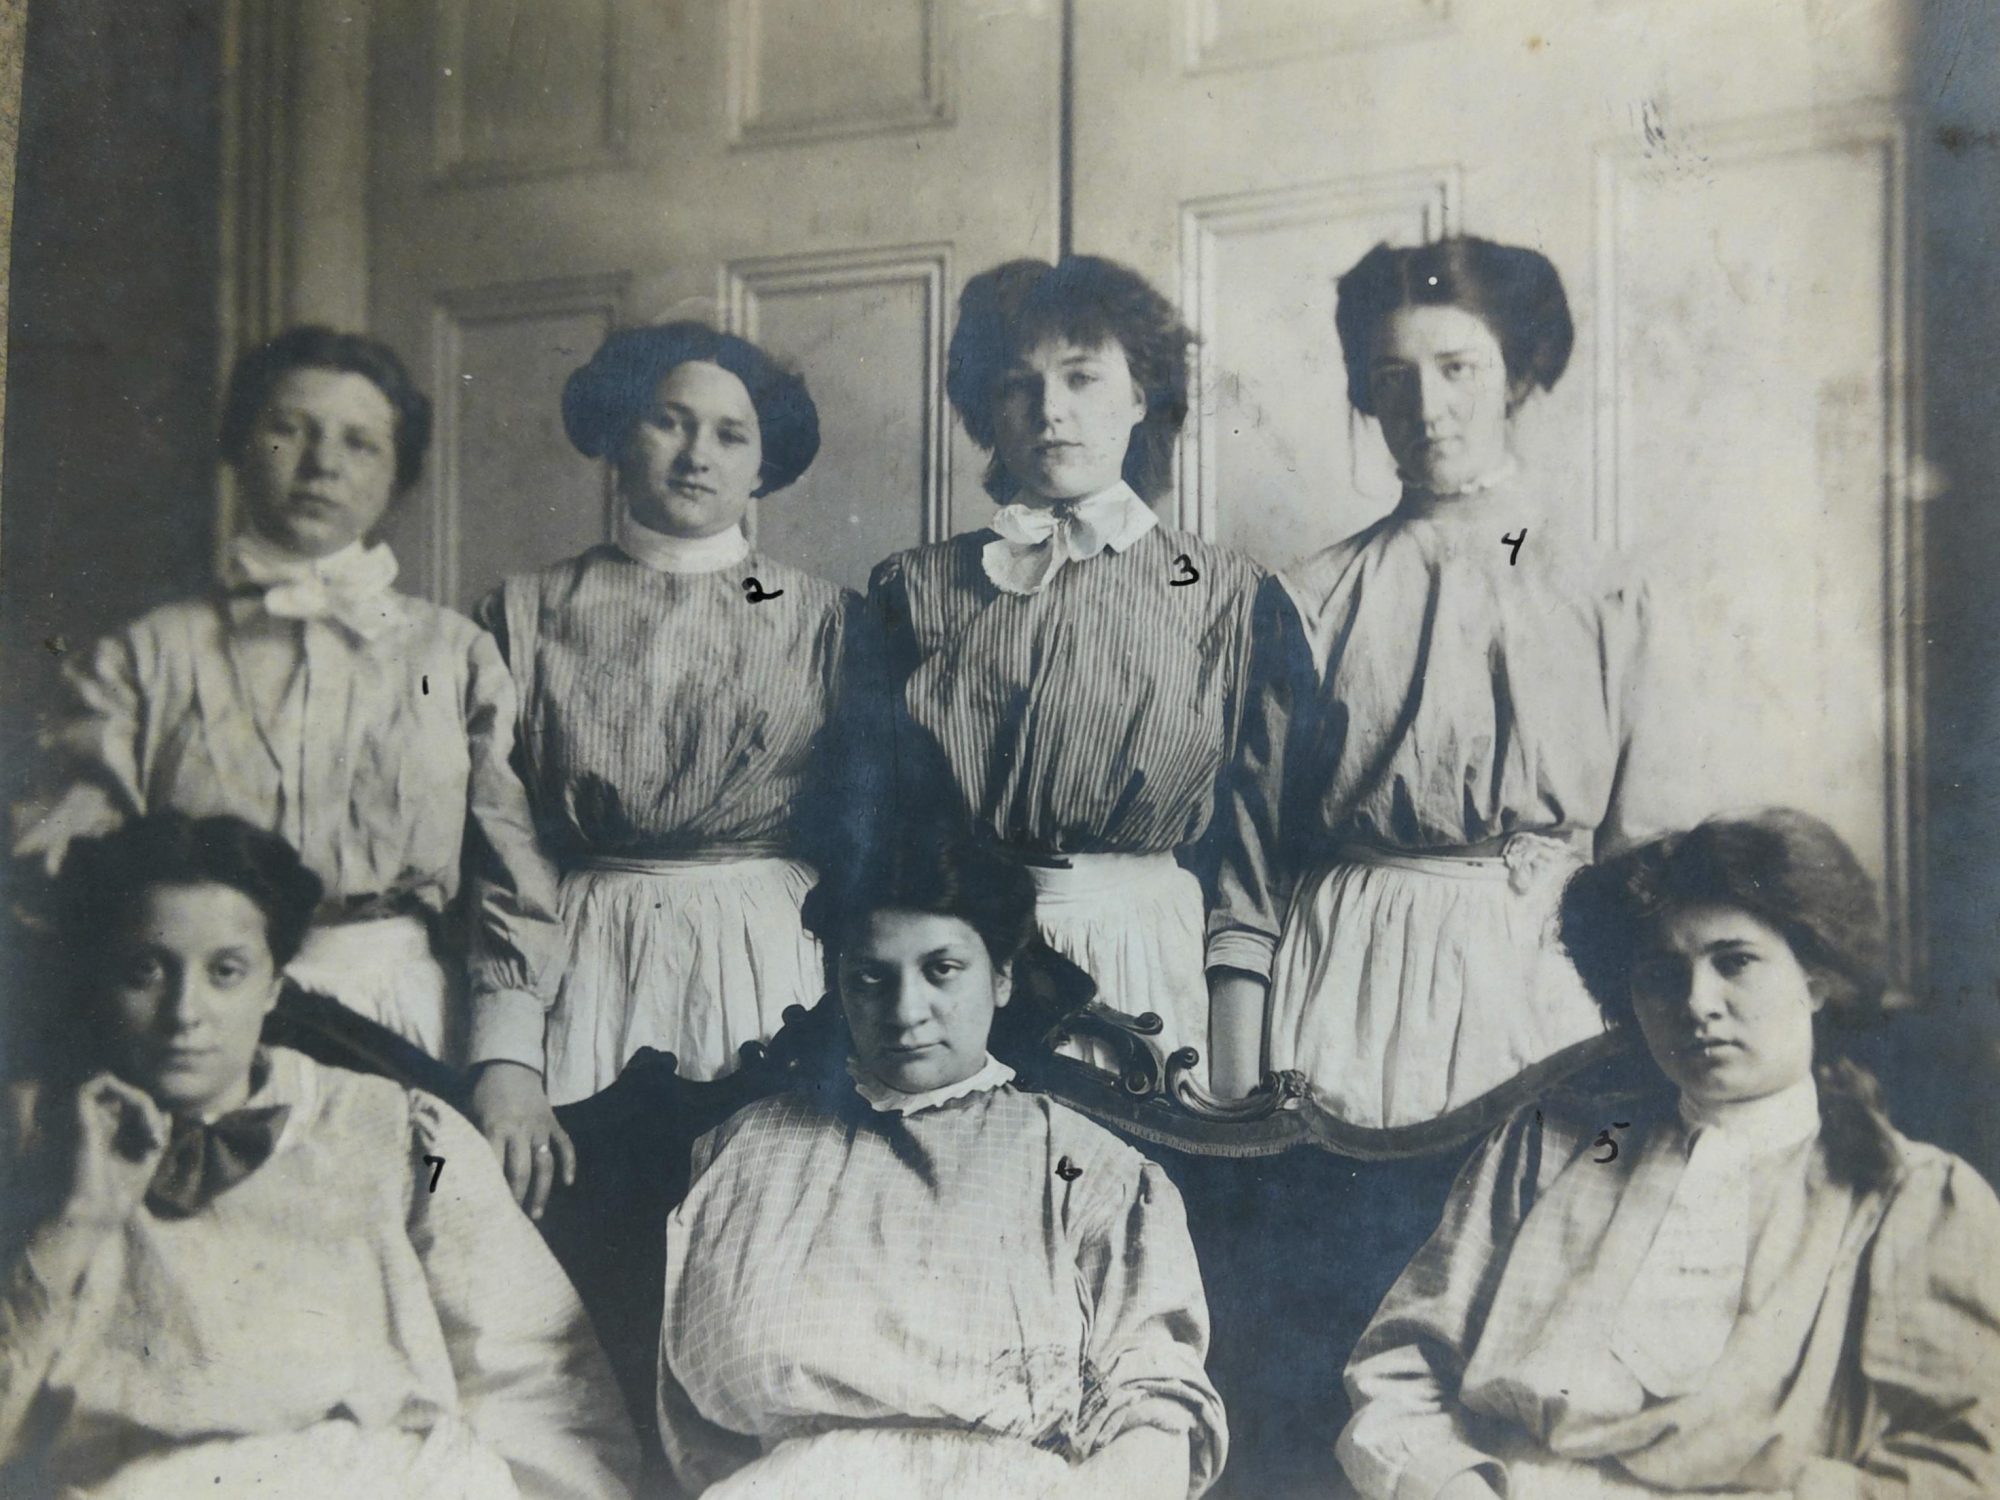 Image of a group of girls looking into the camera. There are hand-drawn numbers on each person.